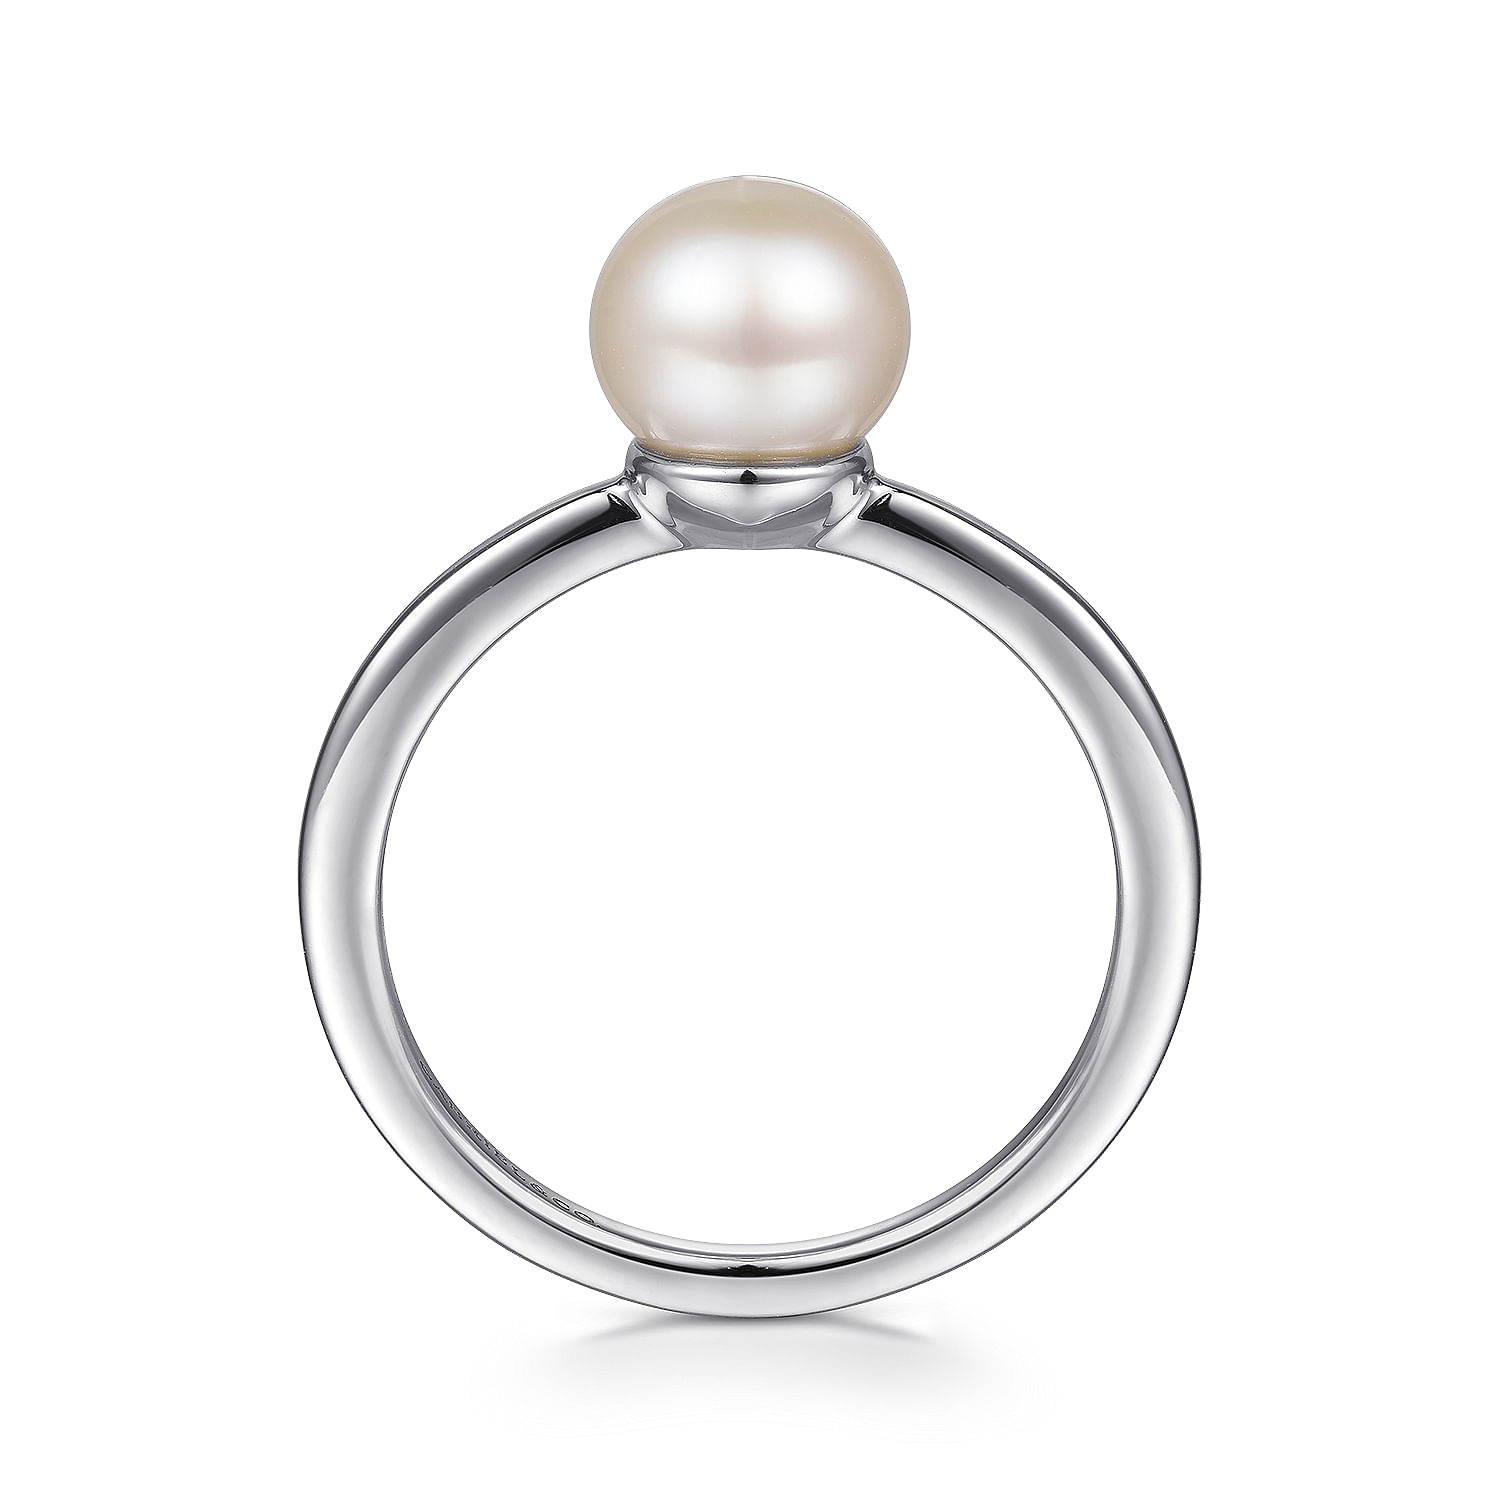 925 Sterling Silver Pearl Ring